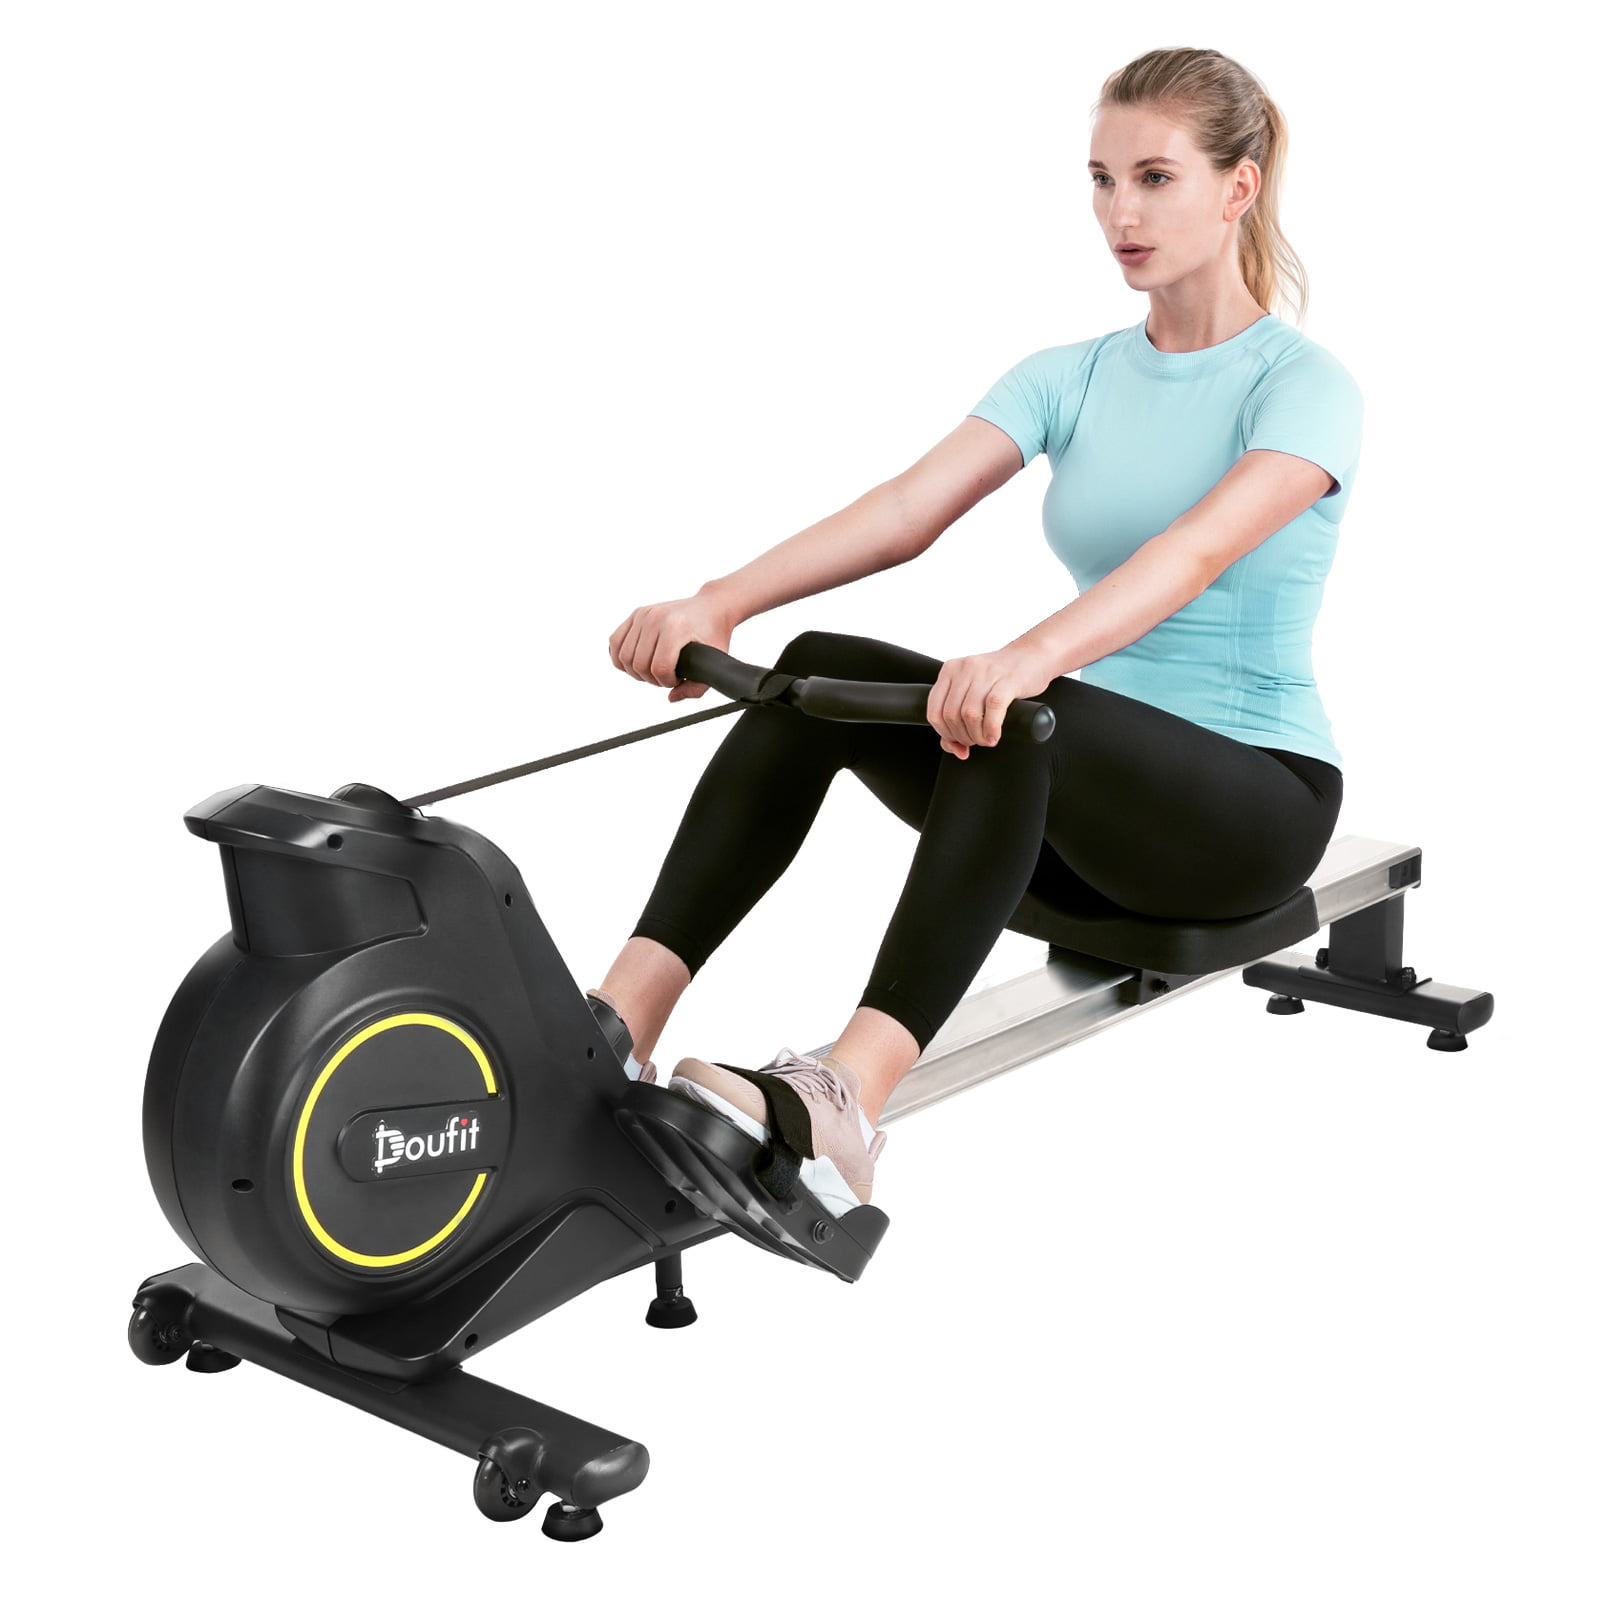 Rowing MachineMarcy NS-40503RW Magnetic Rower Glider Cardio Exercise Workout 